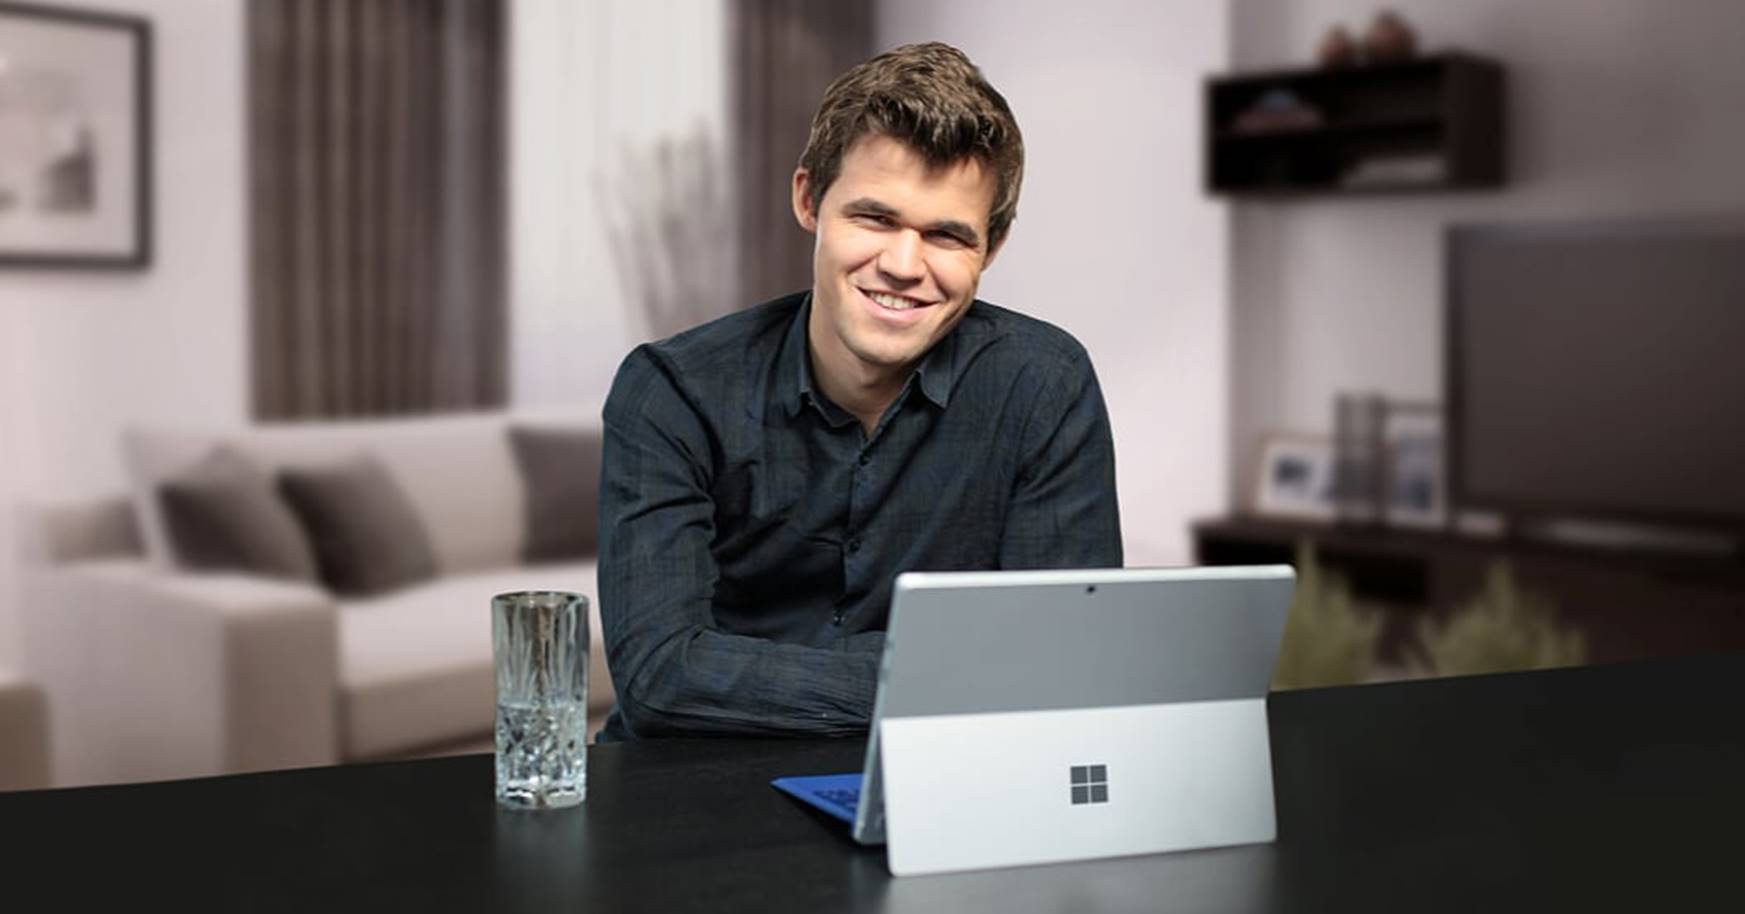 World chess champion Magnus Carlsen sitting with Surface on a table.